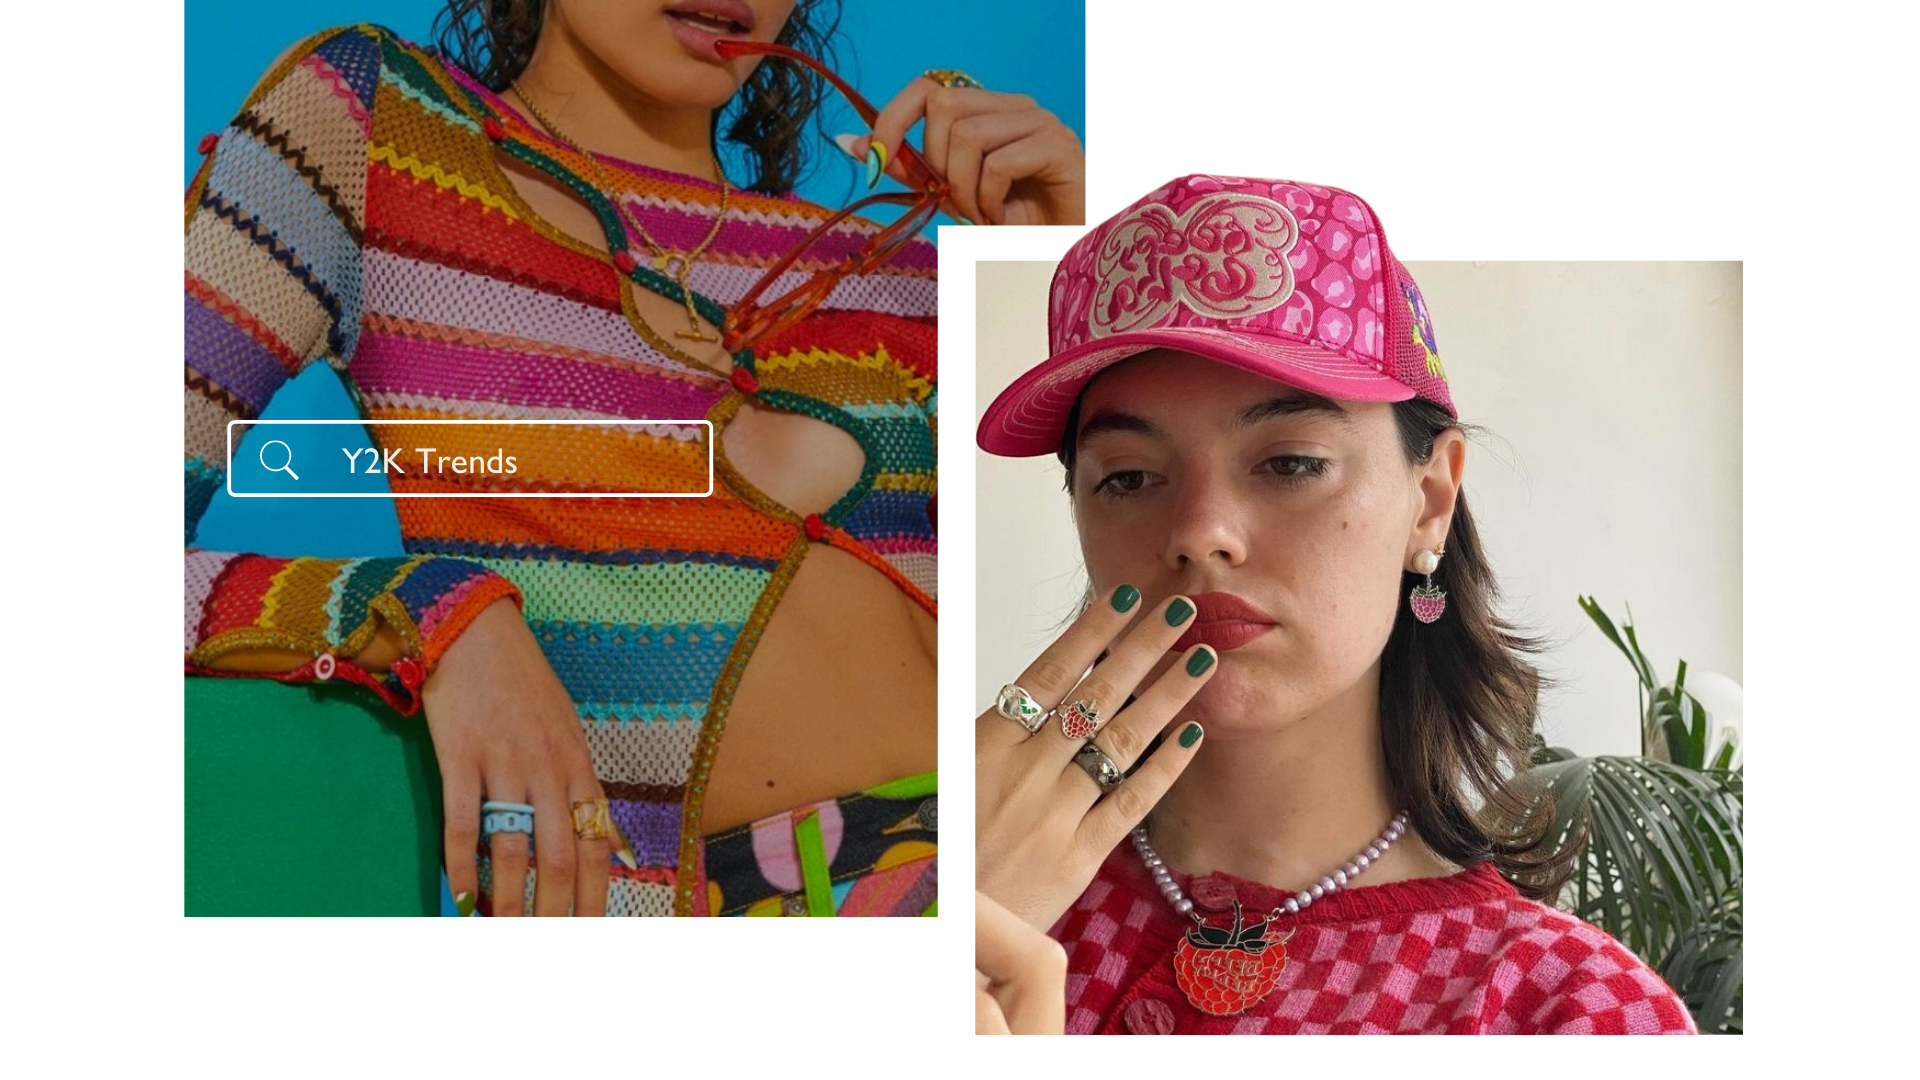 Y2K Aesthetic: Gen Z Is Reviving the 2000s Thin Obsession - FASHION Magazine